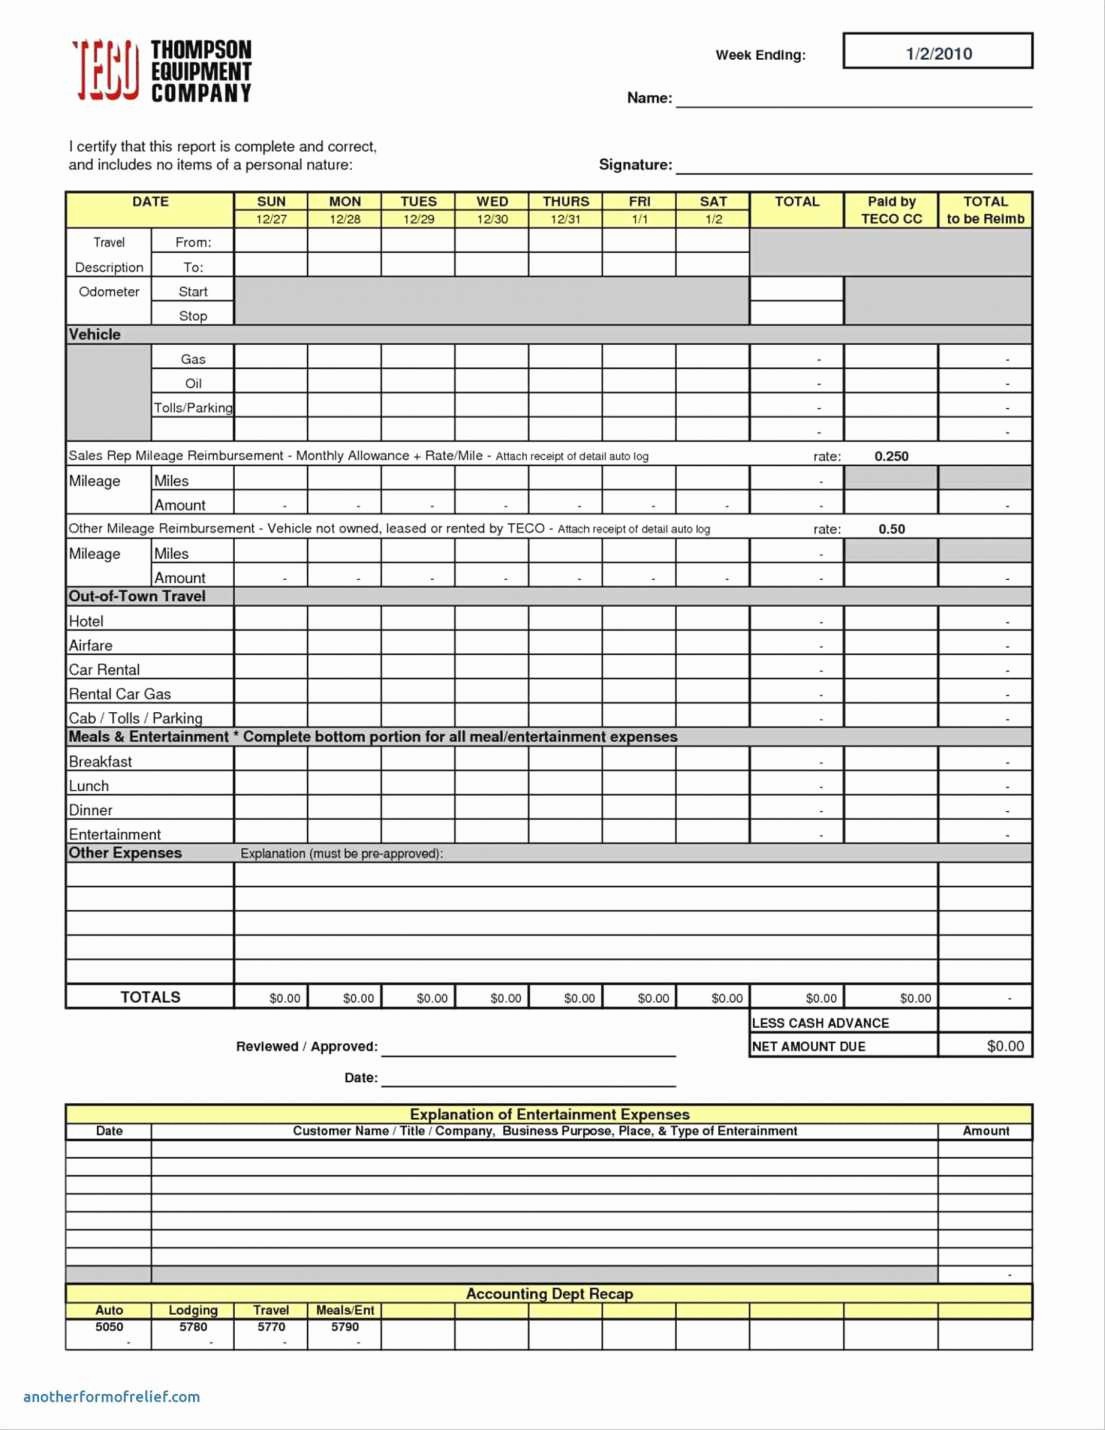 Expense Report Template Excel 2010 New Expense Report Template Excel 2010 Spreadsheet